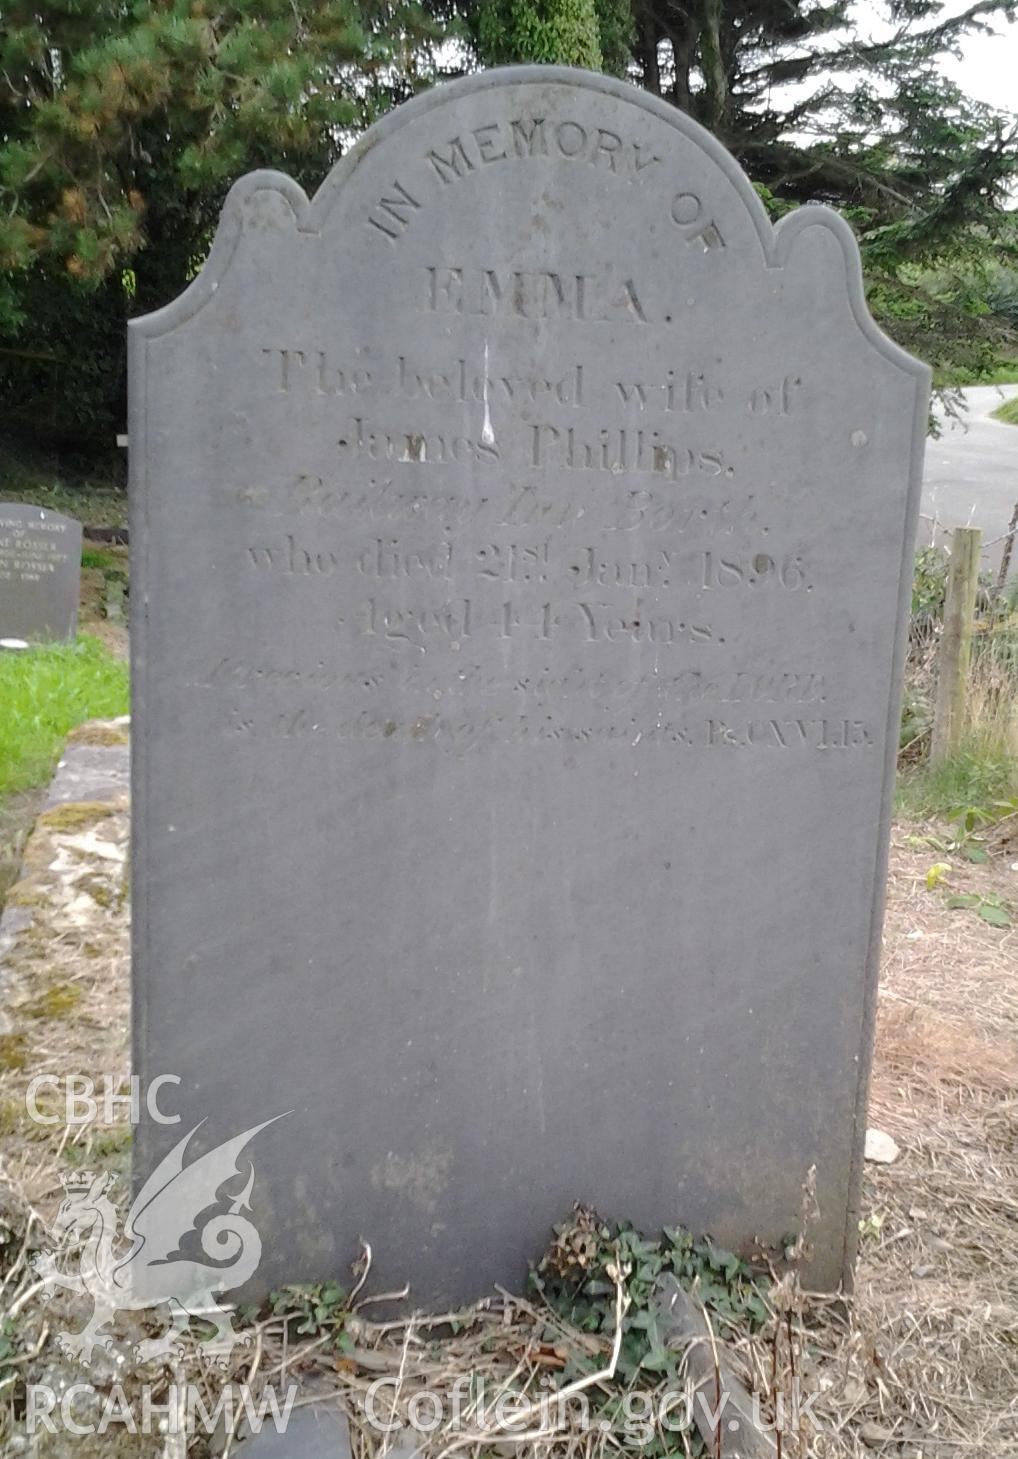 Memorial to Emma, wife of James Phillips of Railway Inn, Borth, died 21 January 1896